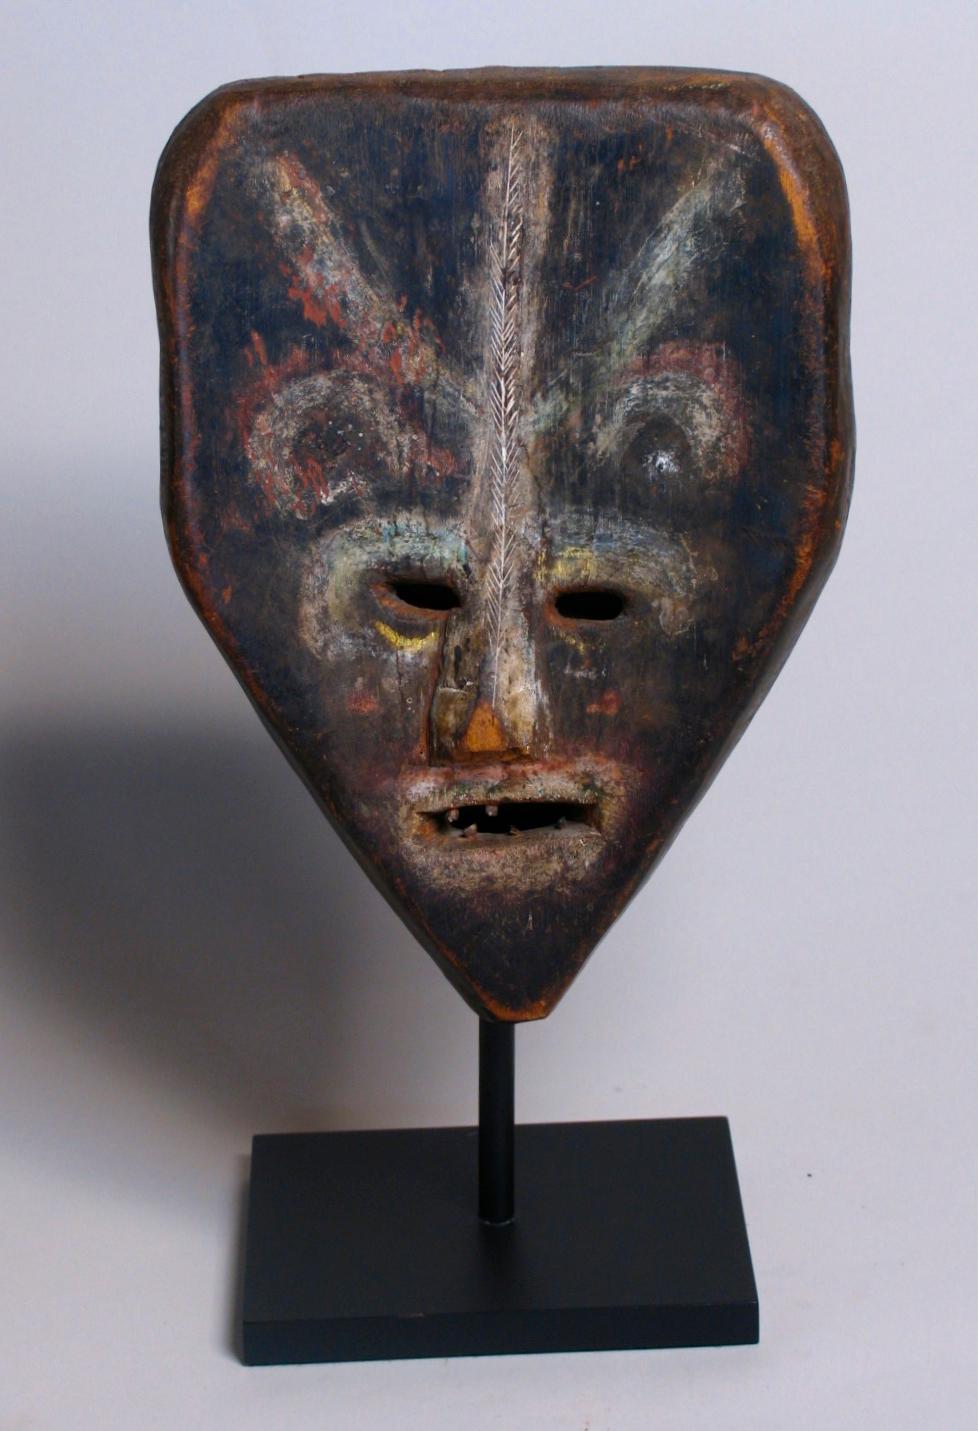 An unusual African ritual mask, Ubangi river basin, carved from a single piece of a close grained soft wood, the overall form with a squared forehead with rounded corners, changing at the brow line into a triangular form with a pointed chin, the